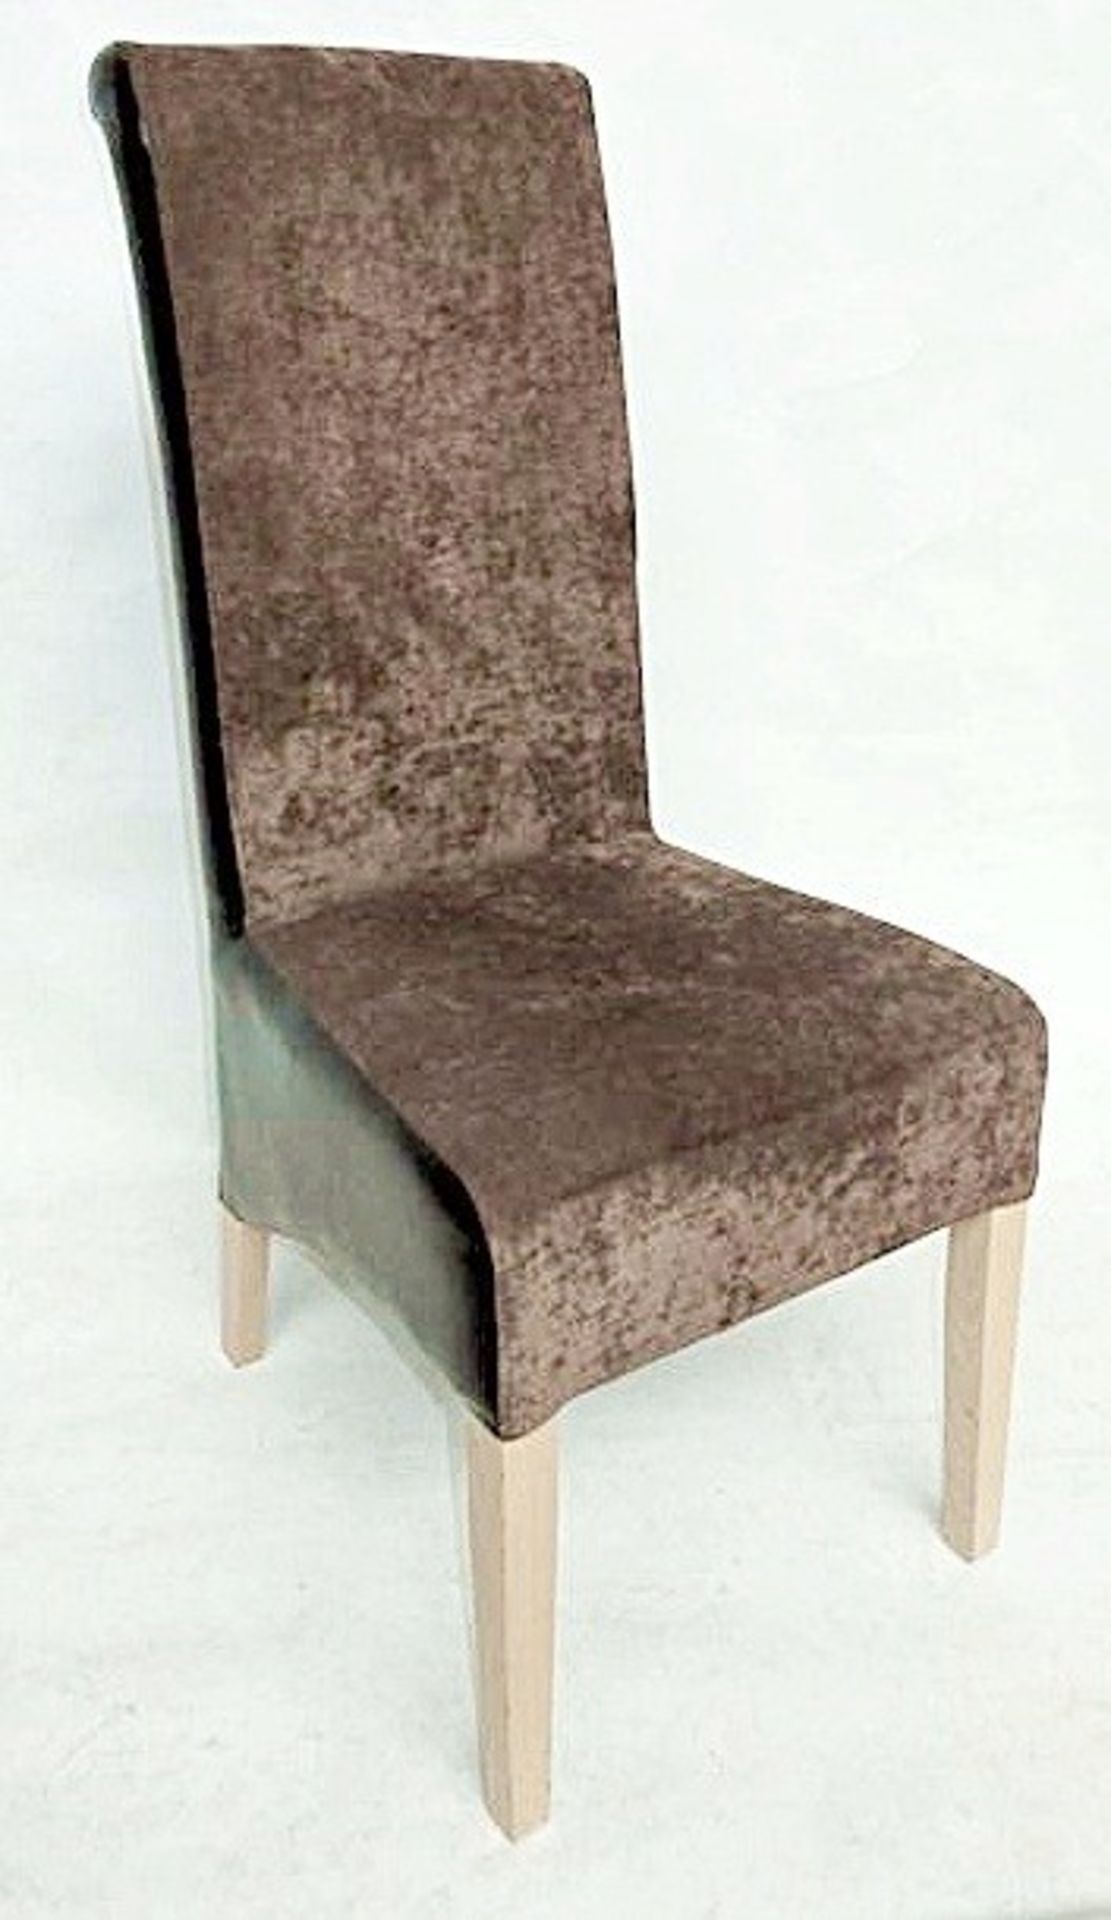 1 x Bespoke Highback Chair In A Rich Brown Chenile - Built And Upholstered By Professional British - Image 13 of 16